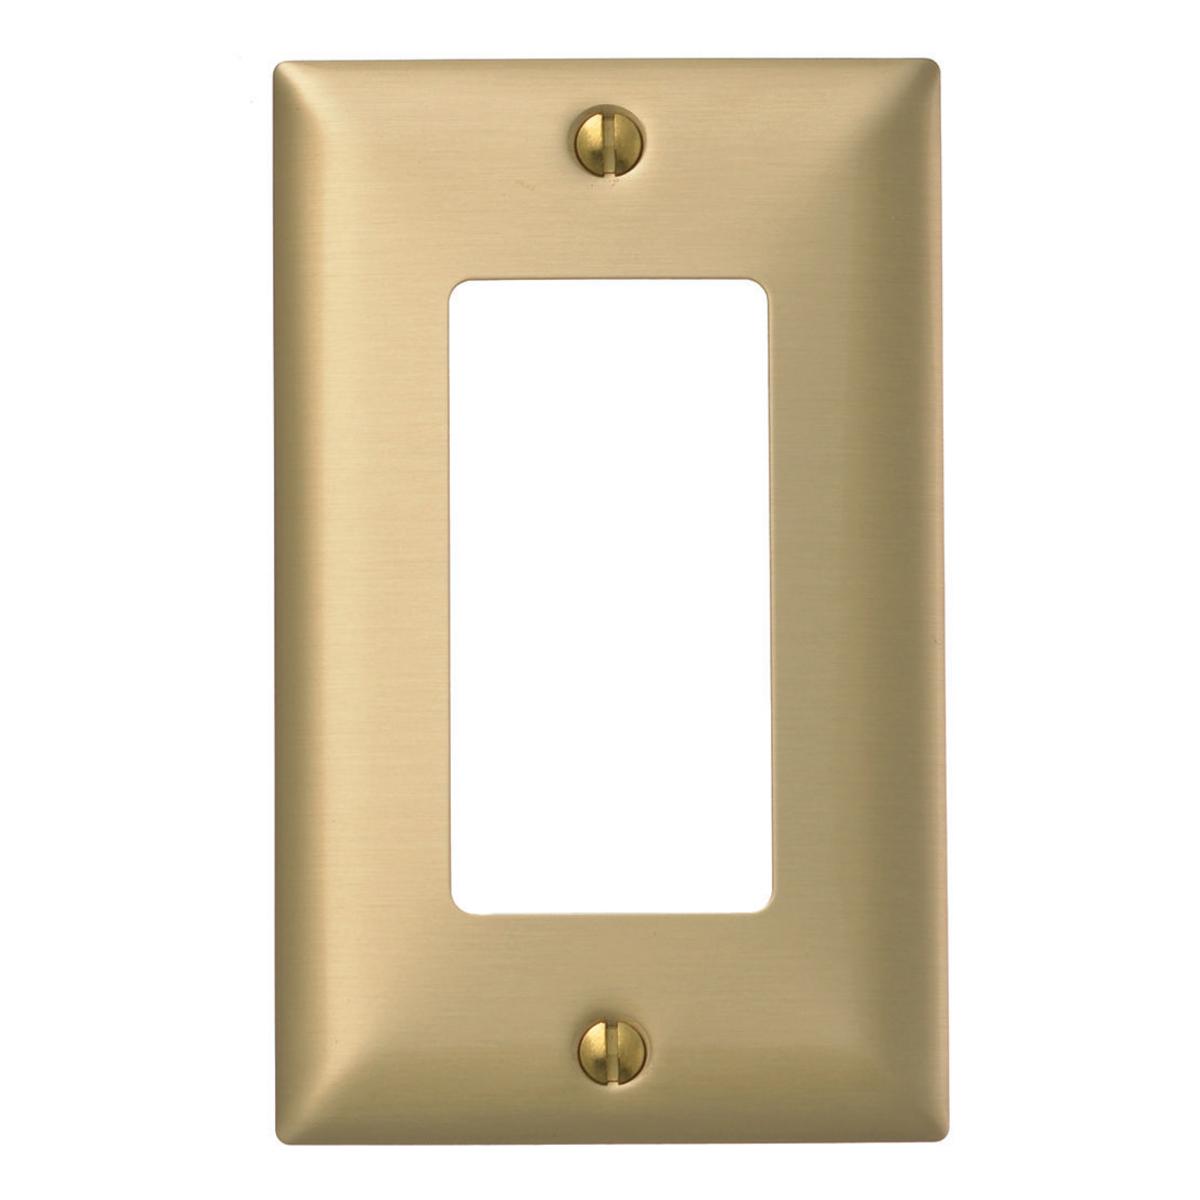 Hubbell SBP26 Wallplates, Metallic, 1-Gang, 1) GFCI, Brass Plated  ; Provides a plush appearance with the durability of metal ; Finish is lacquer coated to inhibit oxidation ; Protective plastic film helps to prevent scratches and damage ; Protective film helps to prev